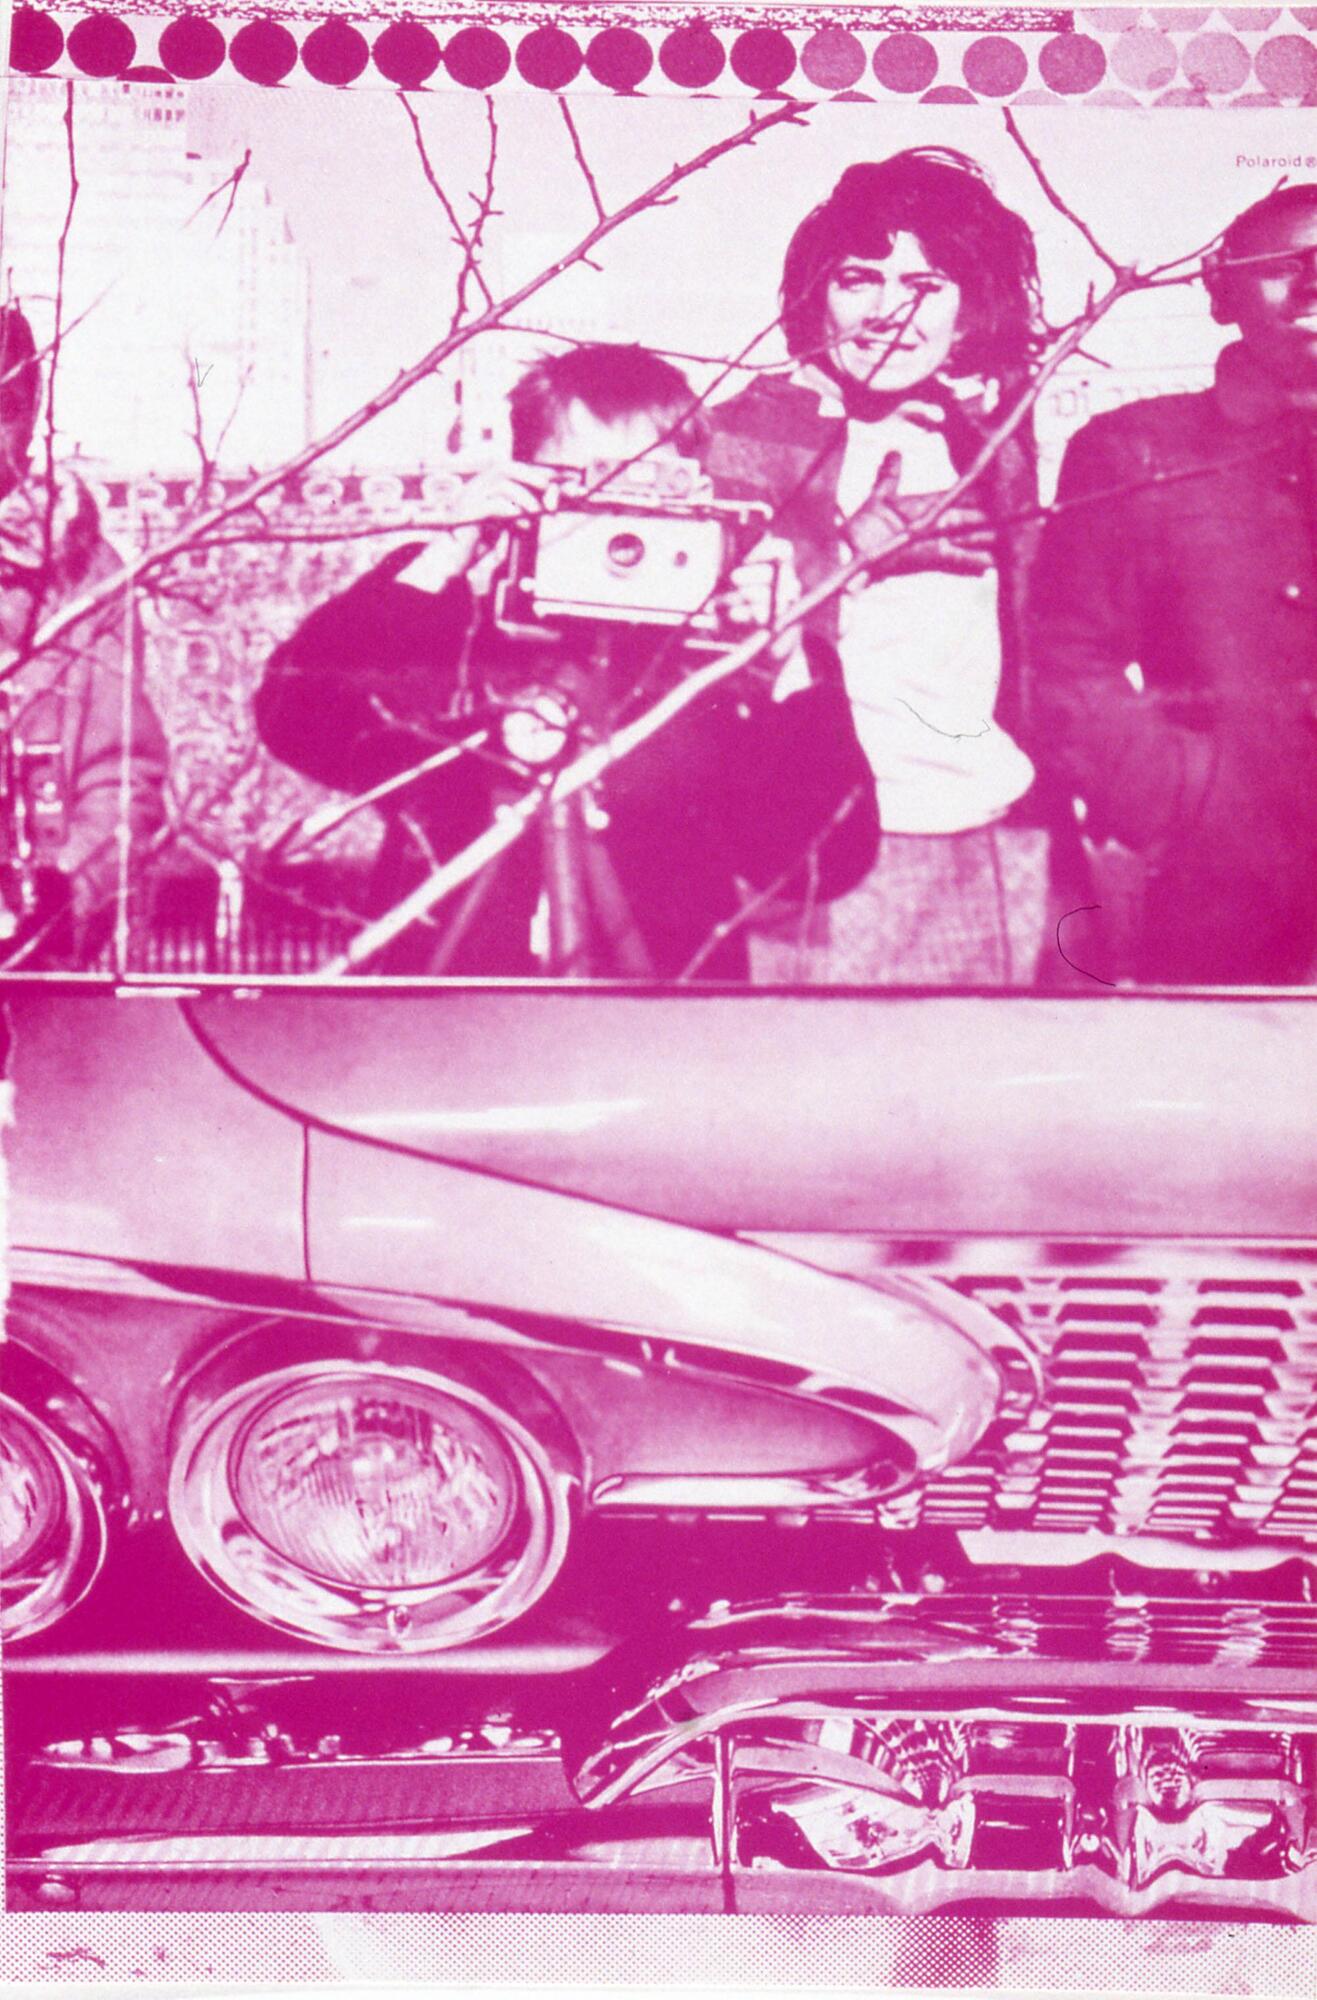 This vertically oriented print with an image on the top and bottom shows young people above, one with a camera pointed at the viewer, and the grill of a car below.